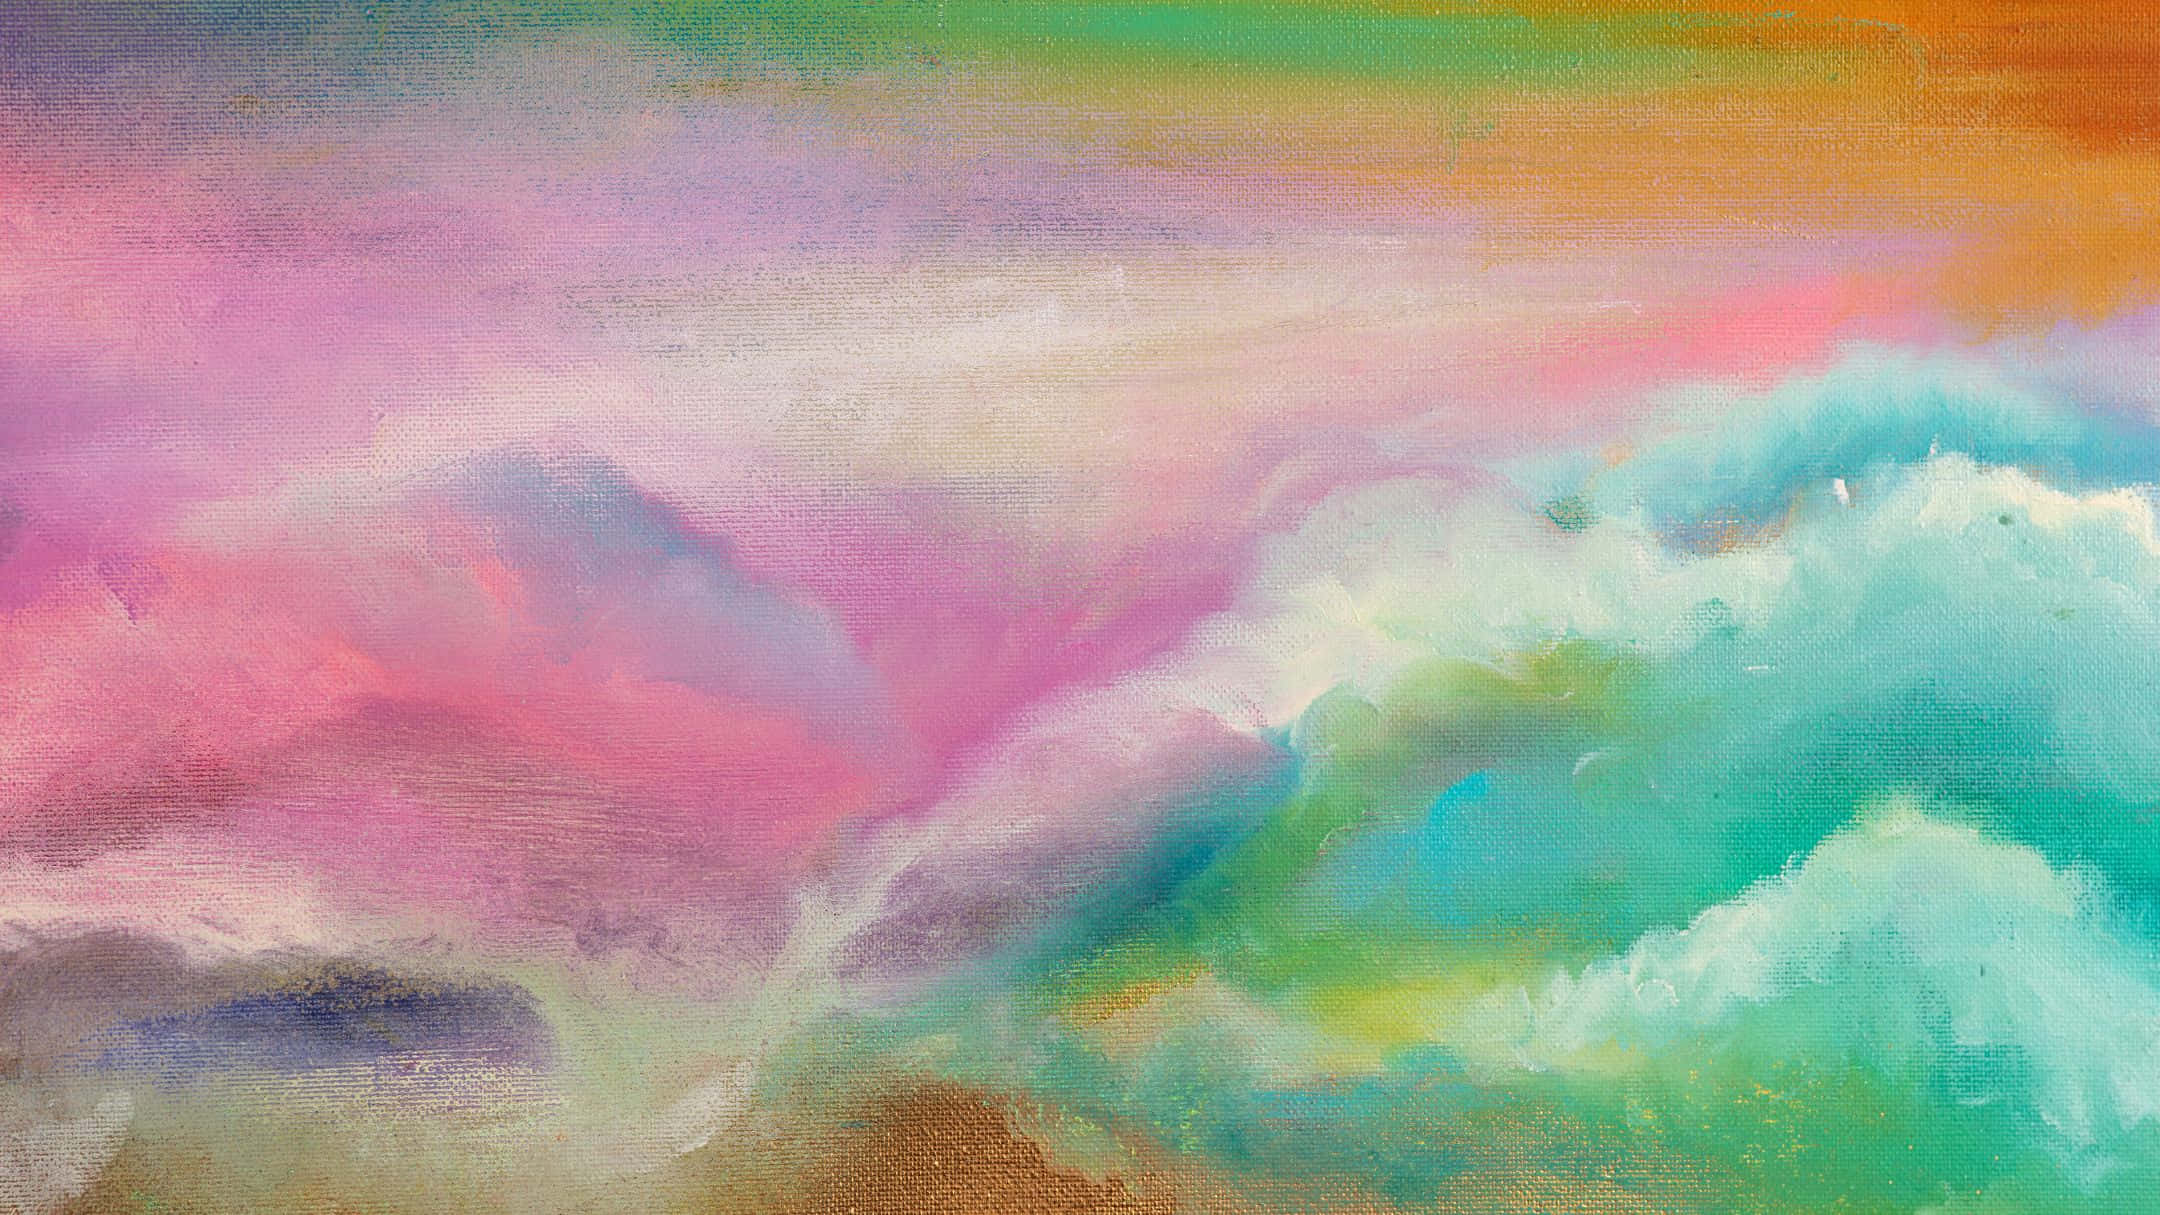 A Painting Of A Colorful Painting Of A Mountain